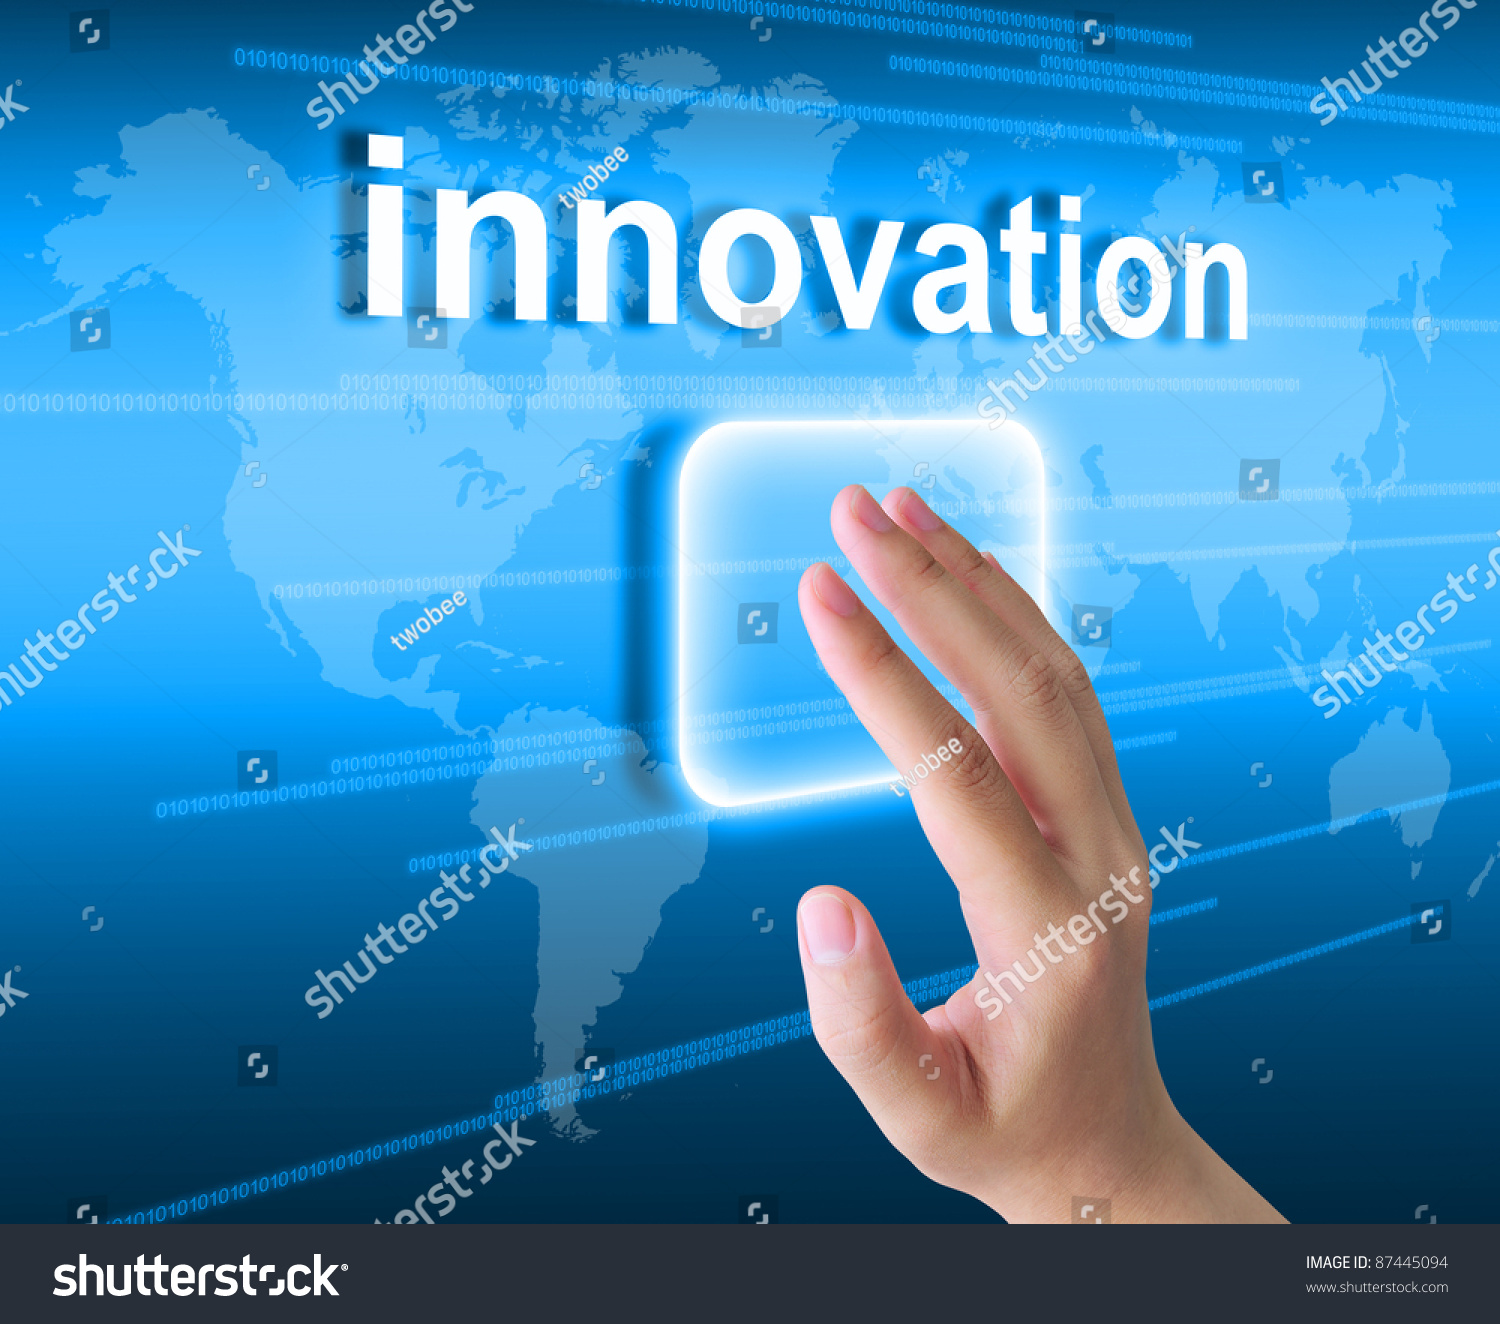 hand pushing innovation button on a touch screen interface #87445094